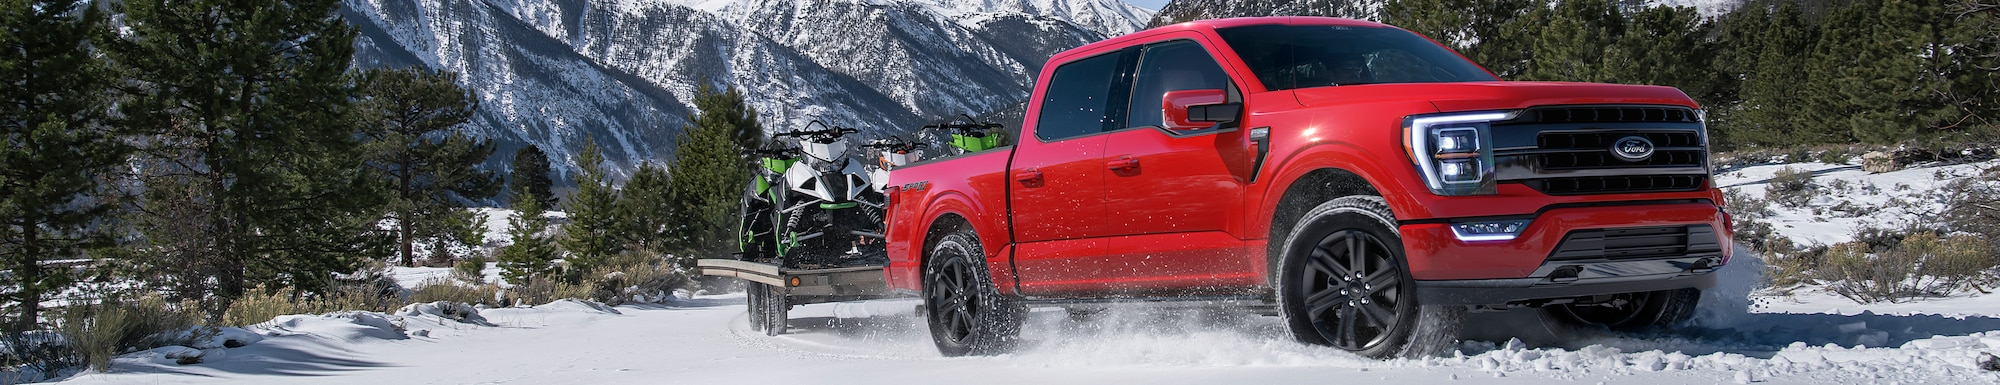 Red Truck Towing Snowmobiles Infront of Snowy Mountains